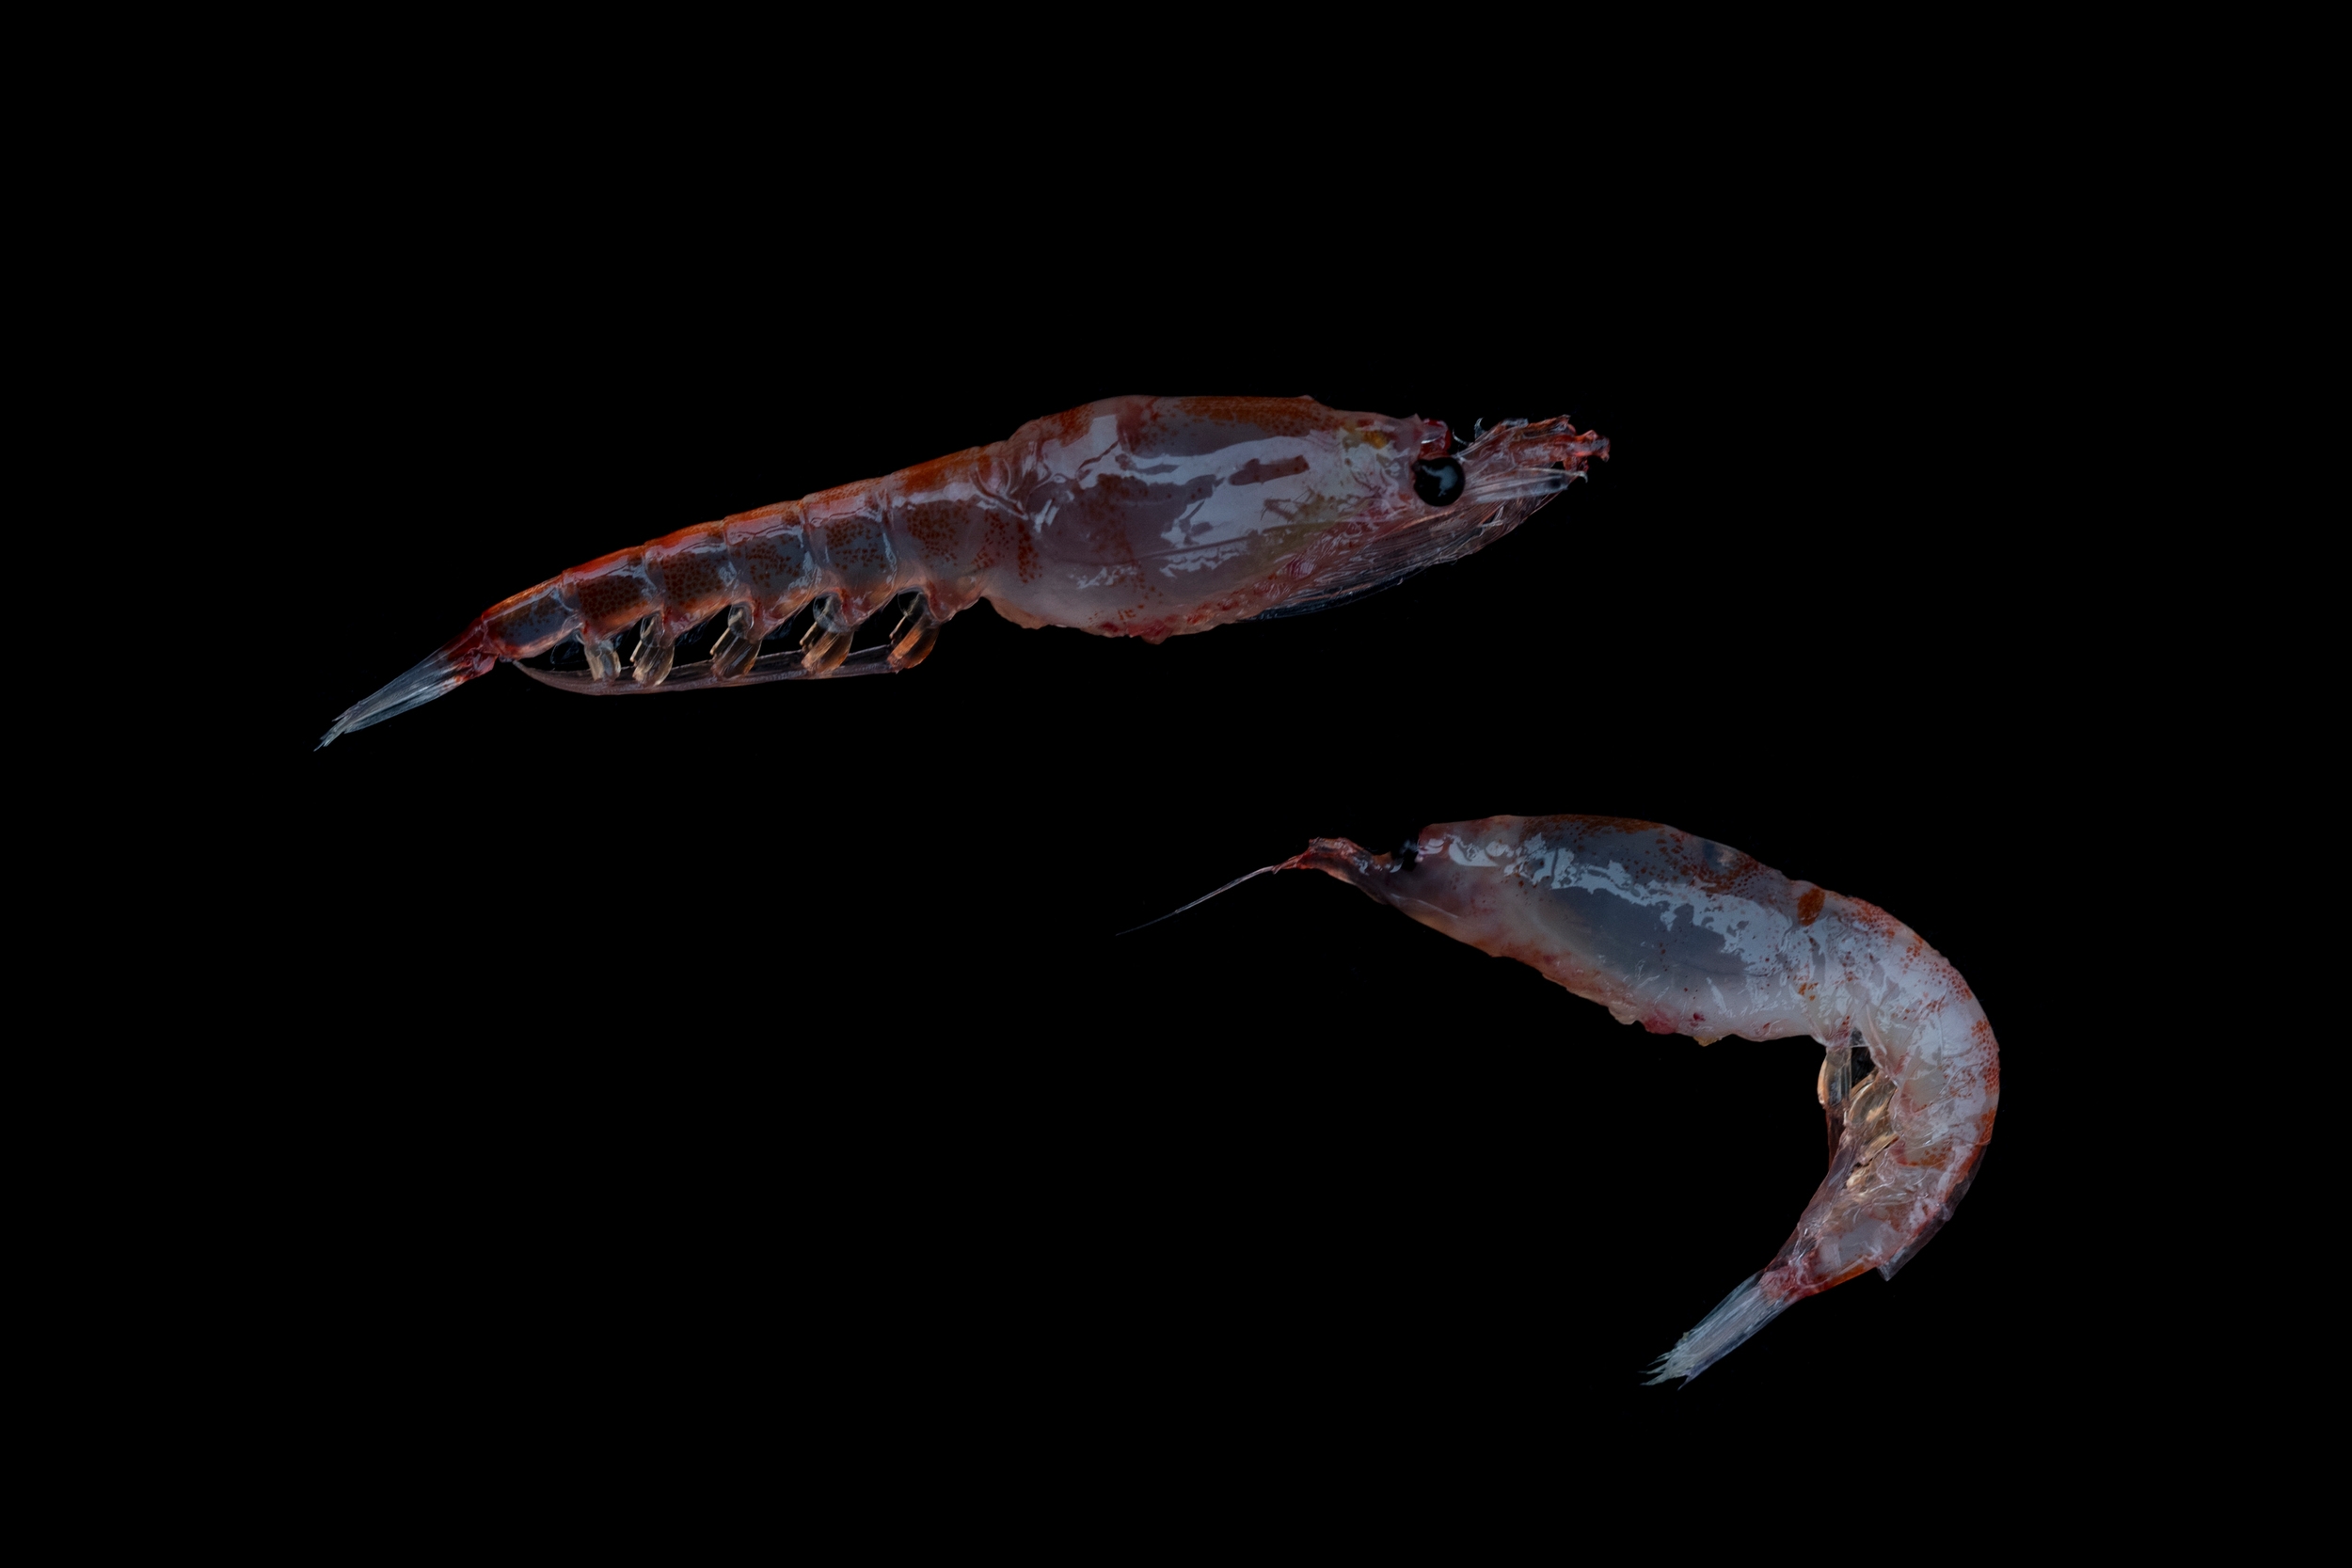 Krill in the Antarctic: Krill, Euphausia superba, represent a critical component of the Antarctic food web, providing food for fish, whales, seals, penguins, albatross and other seabirds, as well as marine invertebrates. © Christian Åslund / Greenpeace